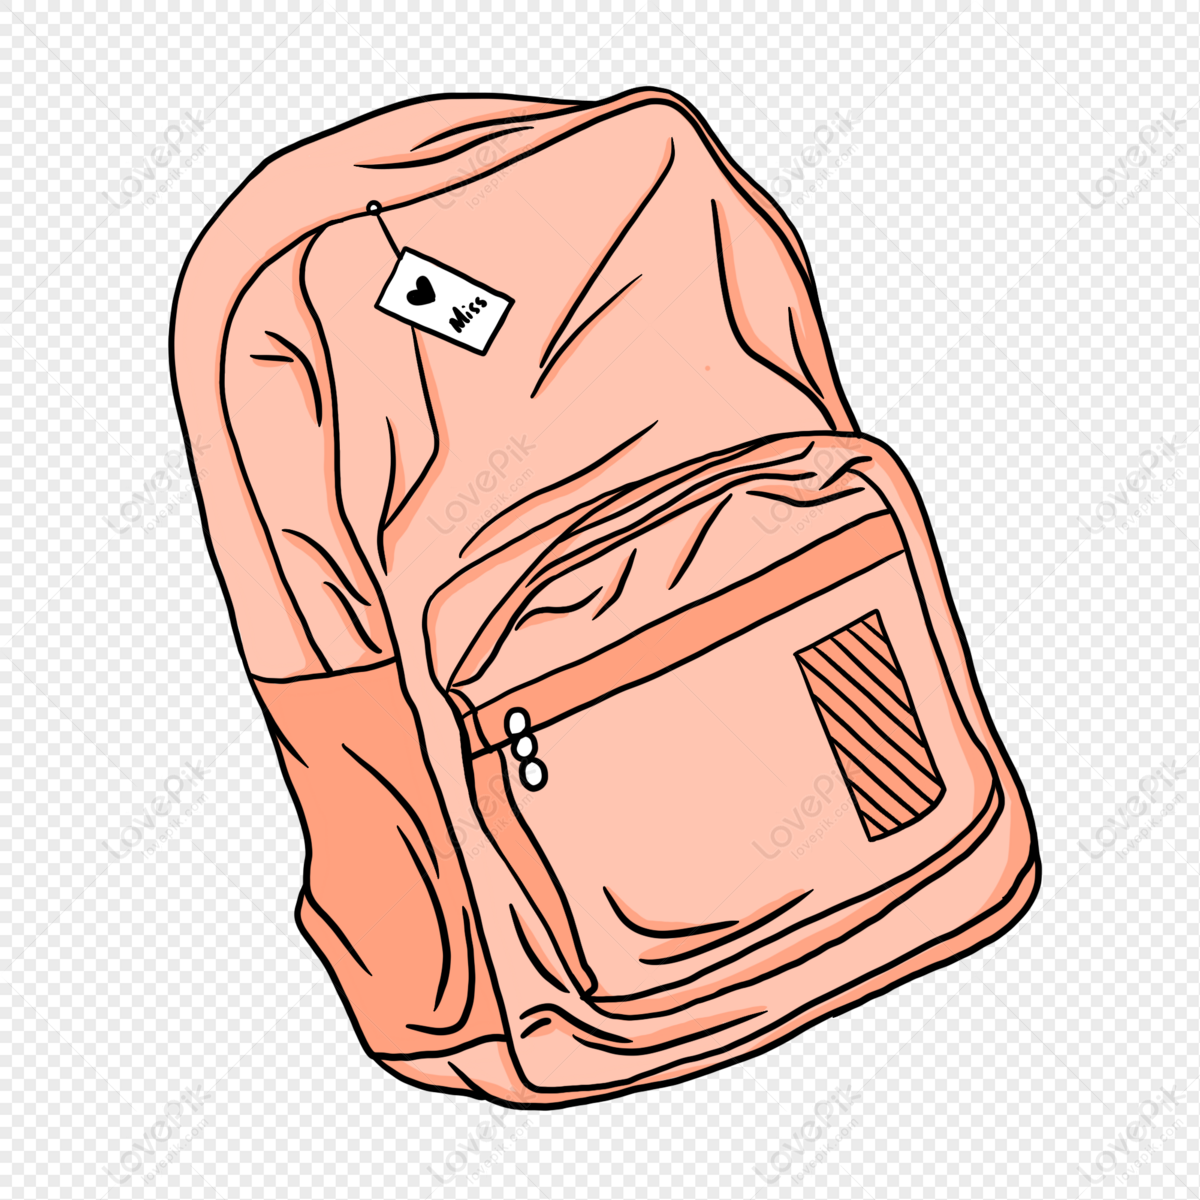 How to Draw a School Bag Step by Step - YouTube